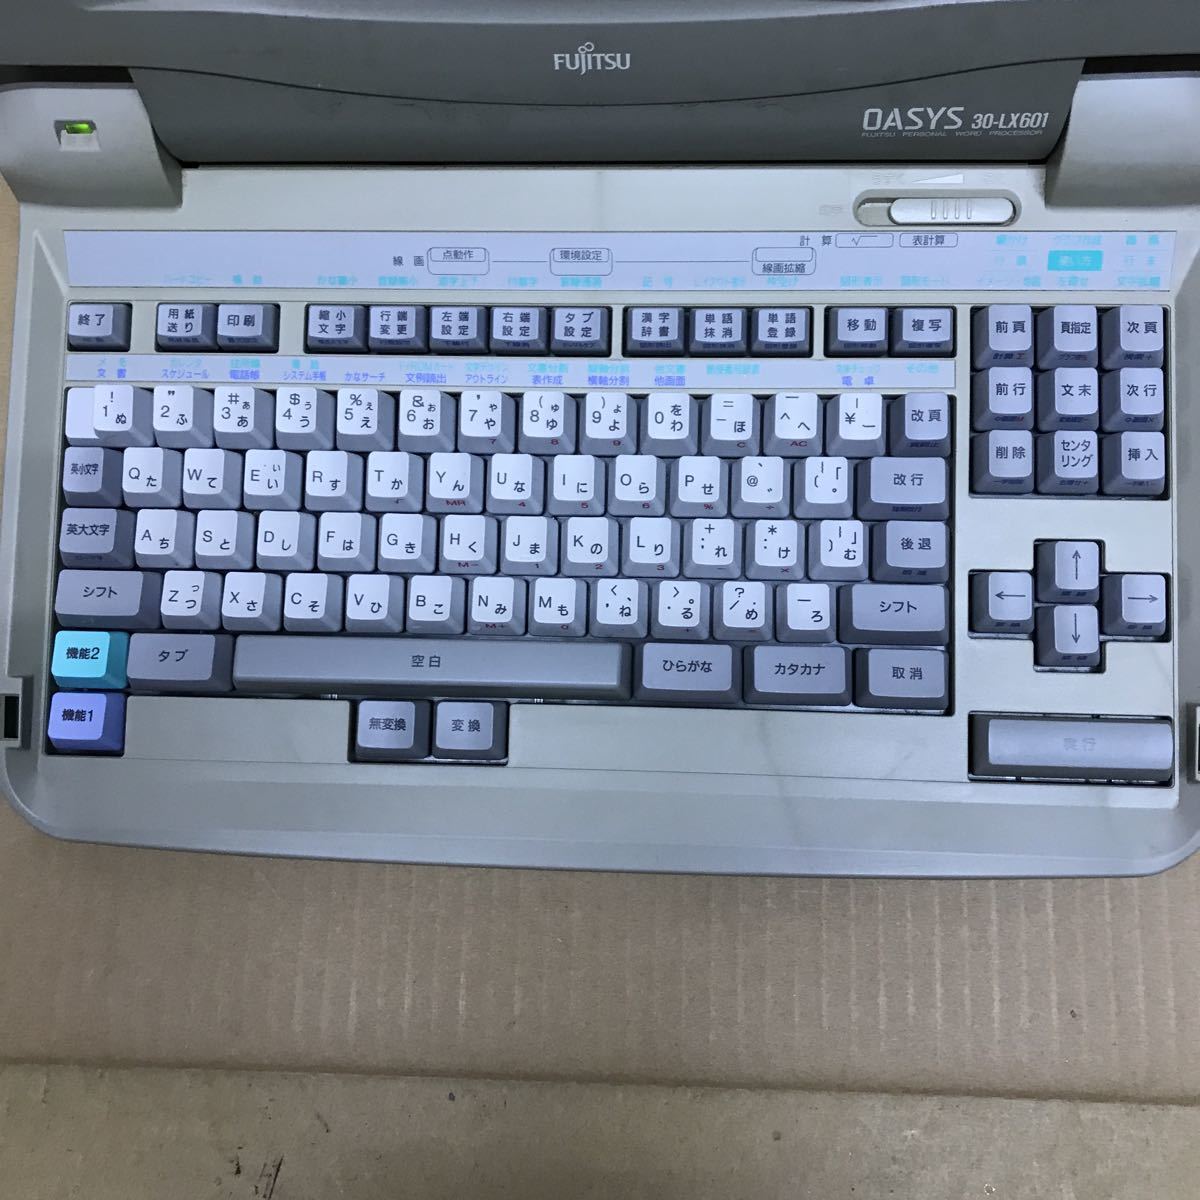 K2119 Fujitsu word-processor 30-LX601 ( after the bidding successfully maintenance commodity ) 3 months guarantee equipped 